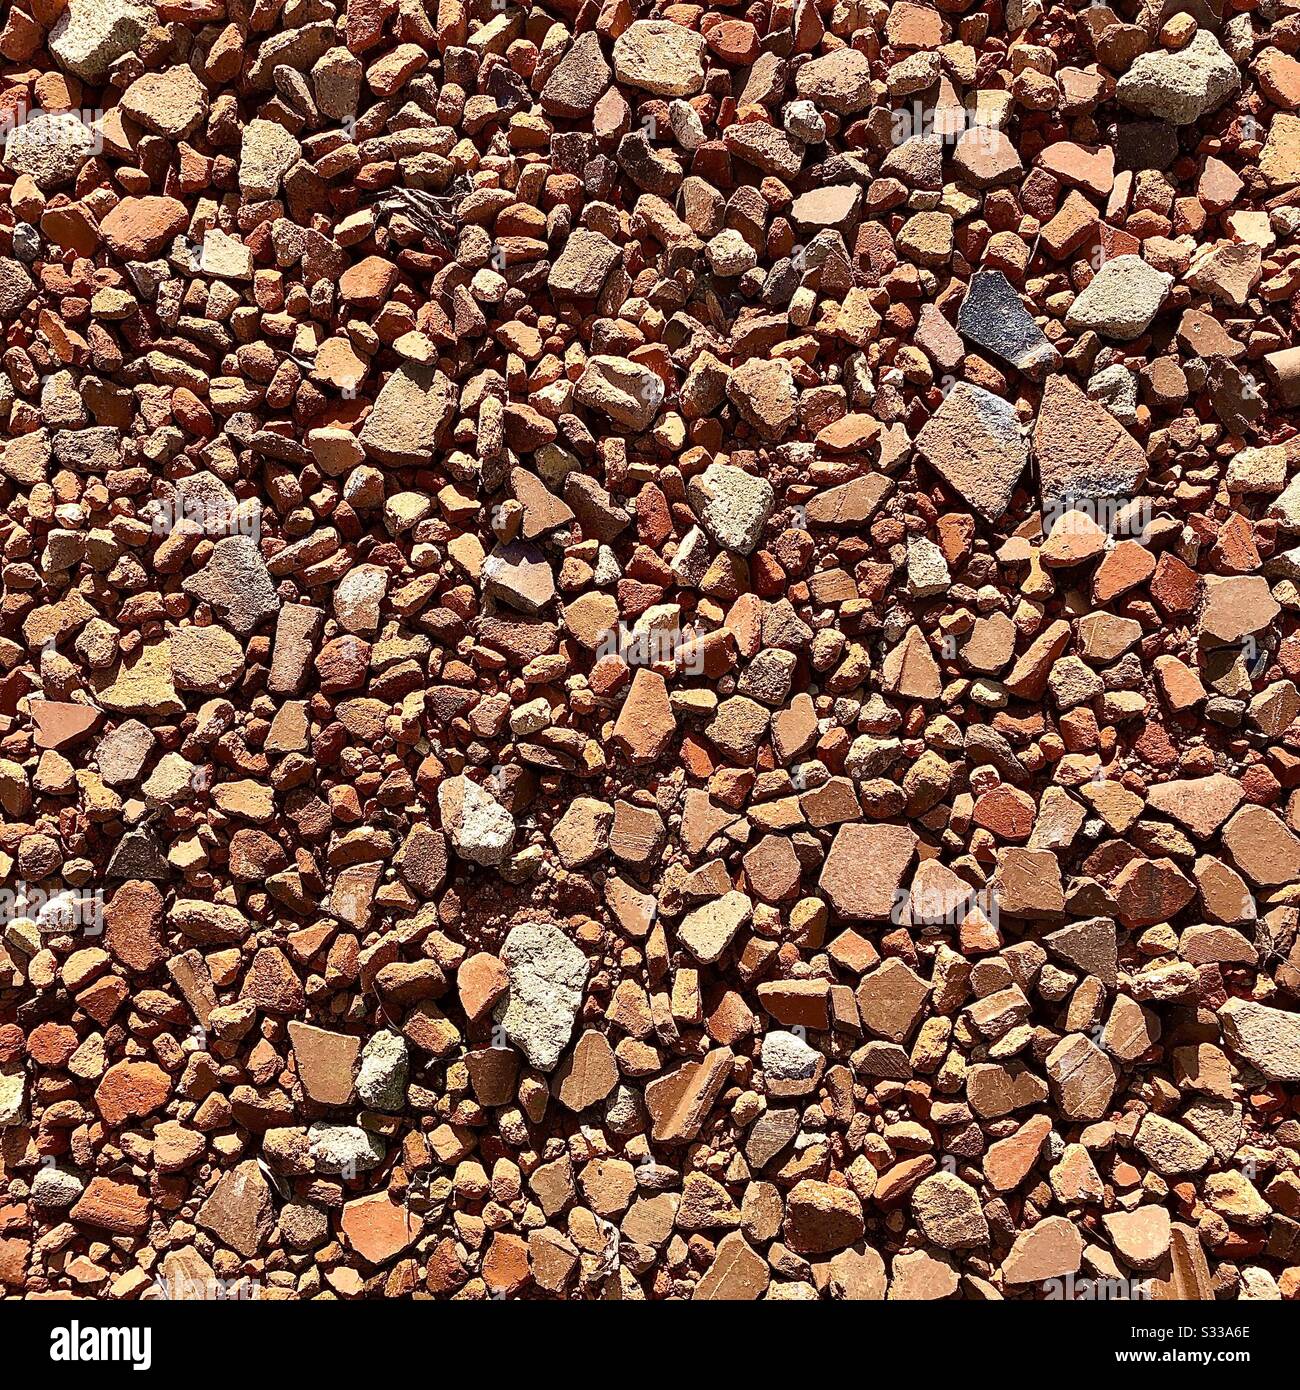 Broken red brick and tile driveway foundation. Stock Photo